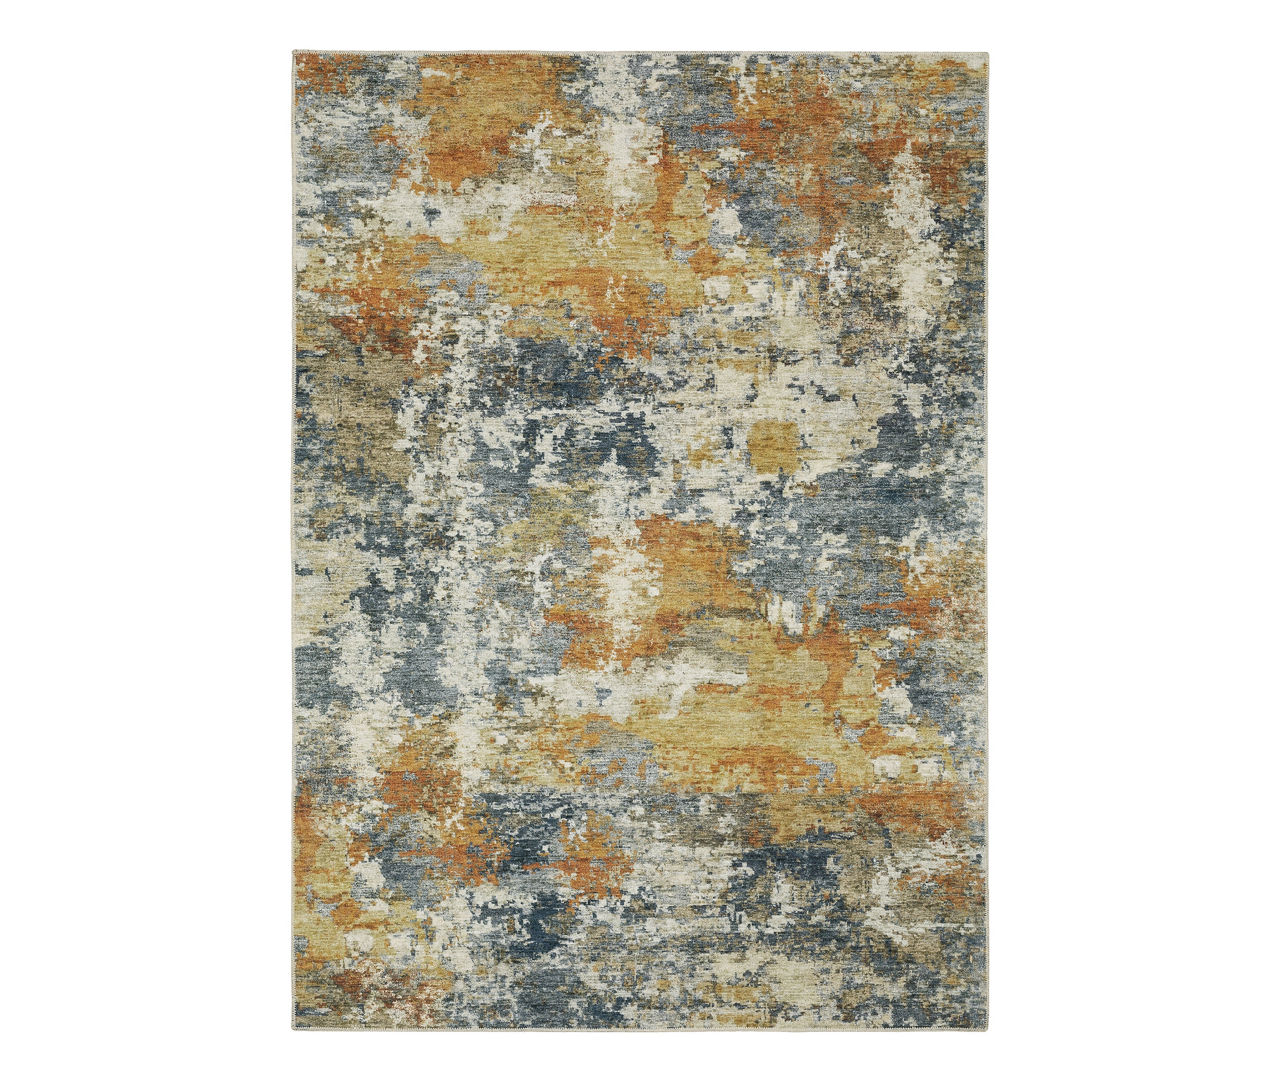 Malay Blue & Gold Abstract Area Rug, (2' x 3')